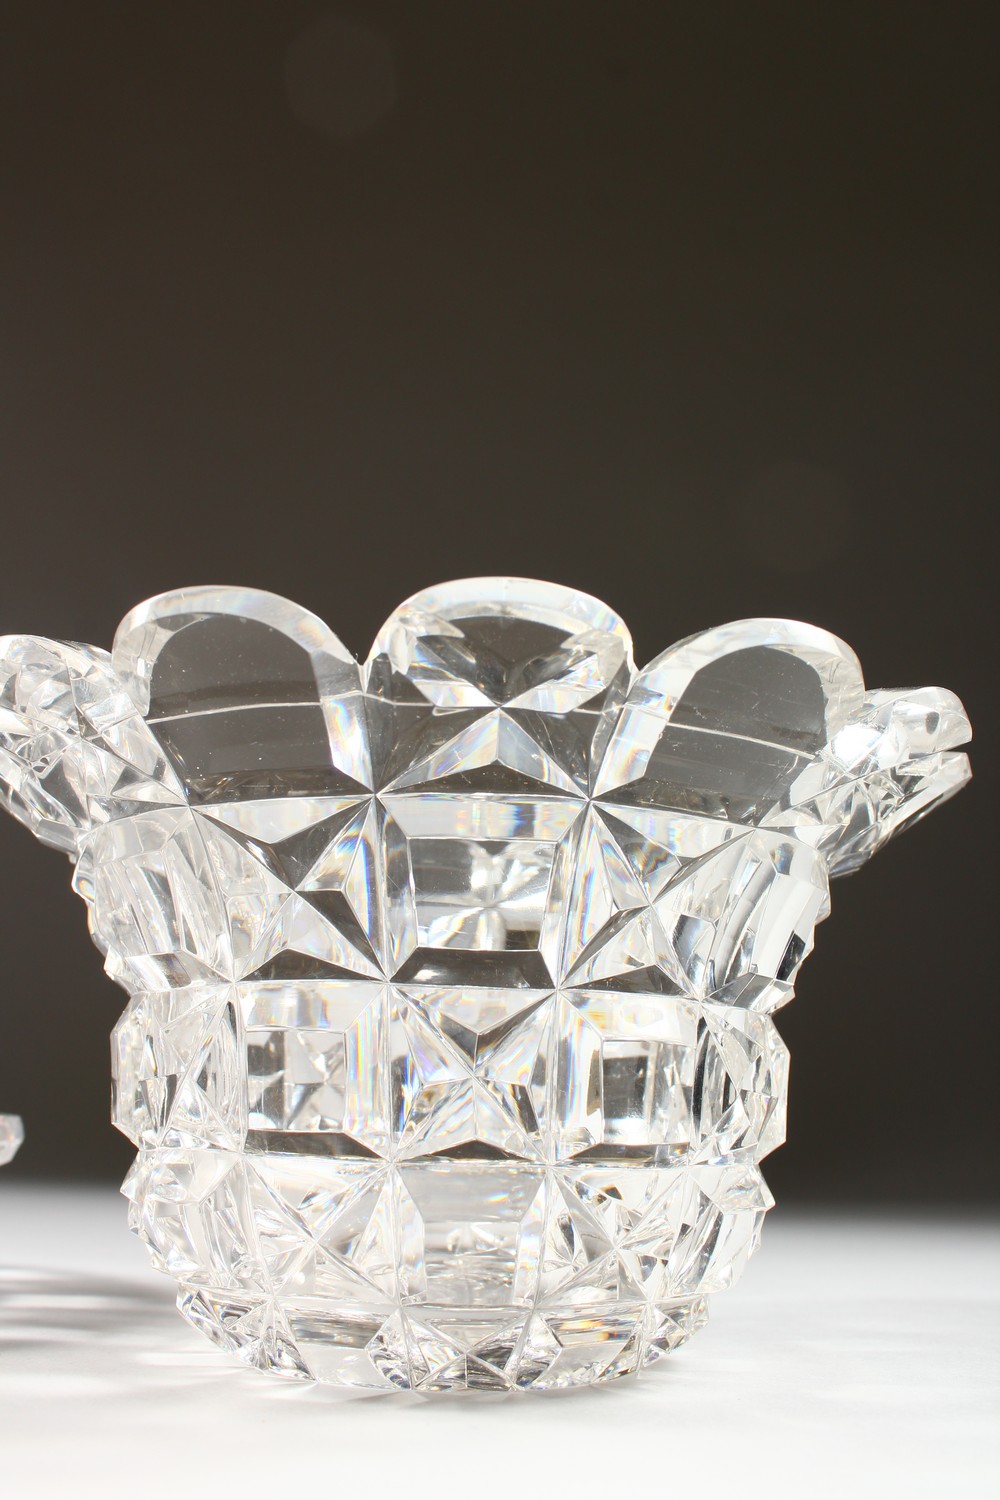 A GOOD 18TH CENTURY IRISH CRYSTAL CIRCULAR BOWL, COVER AND STAND. - Image 9 of 13